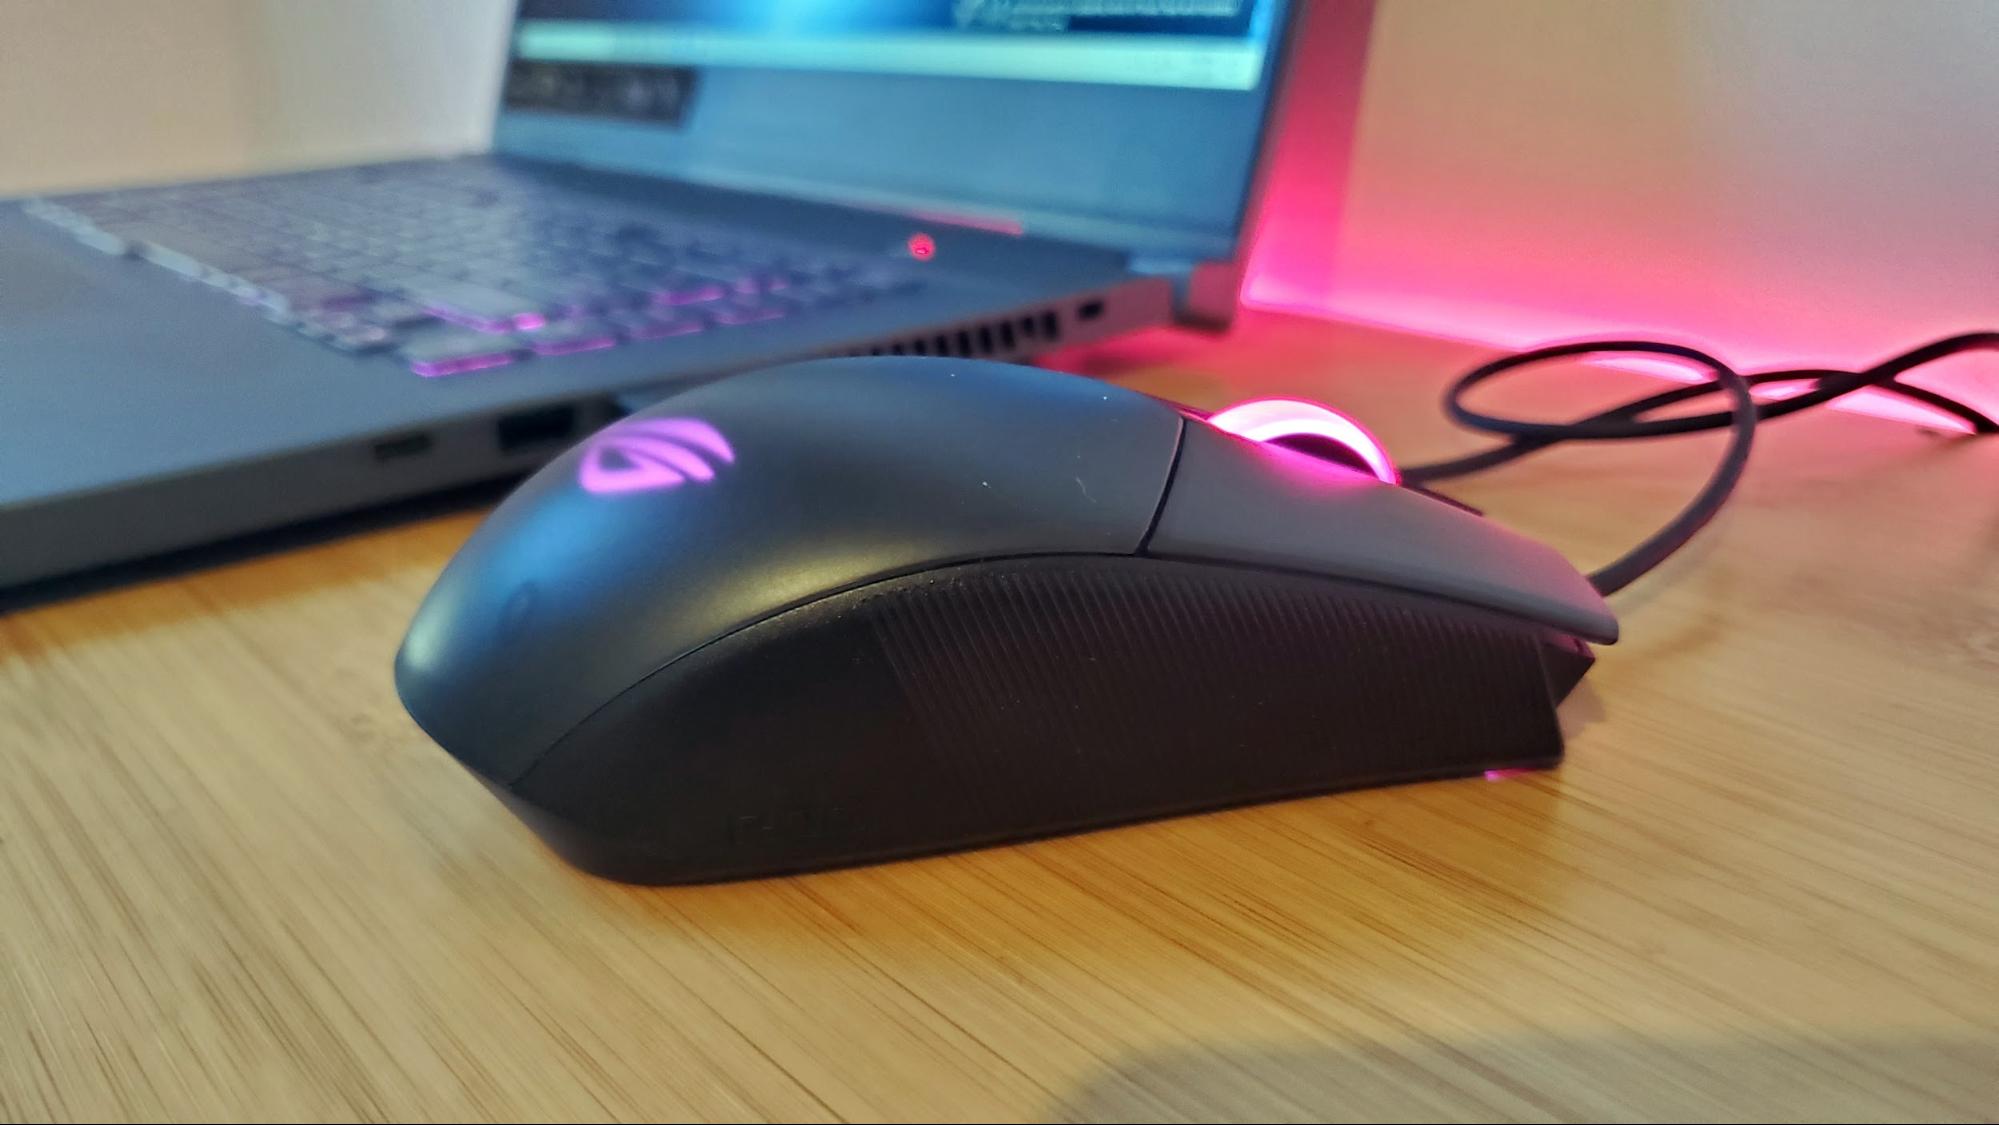 Asus ROG Strix Impact II Electro Punk Mouse Review: Style Over Substance?